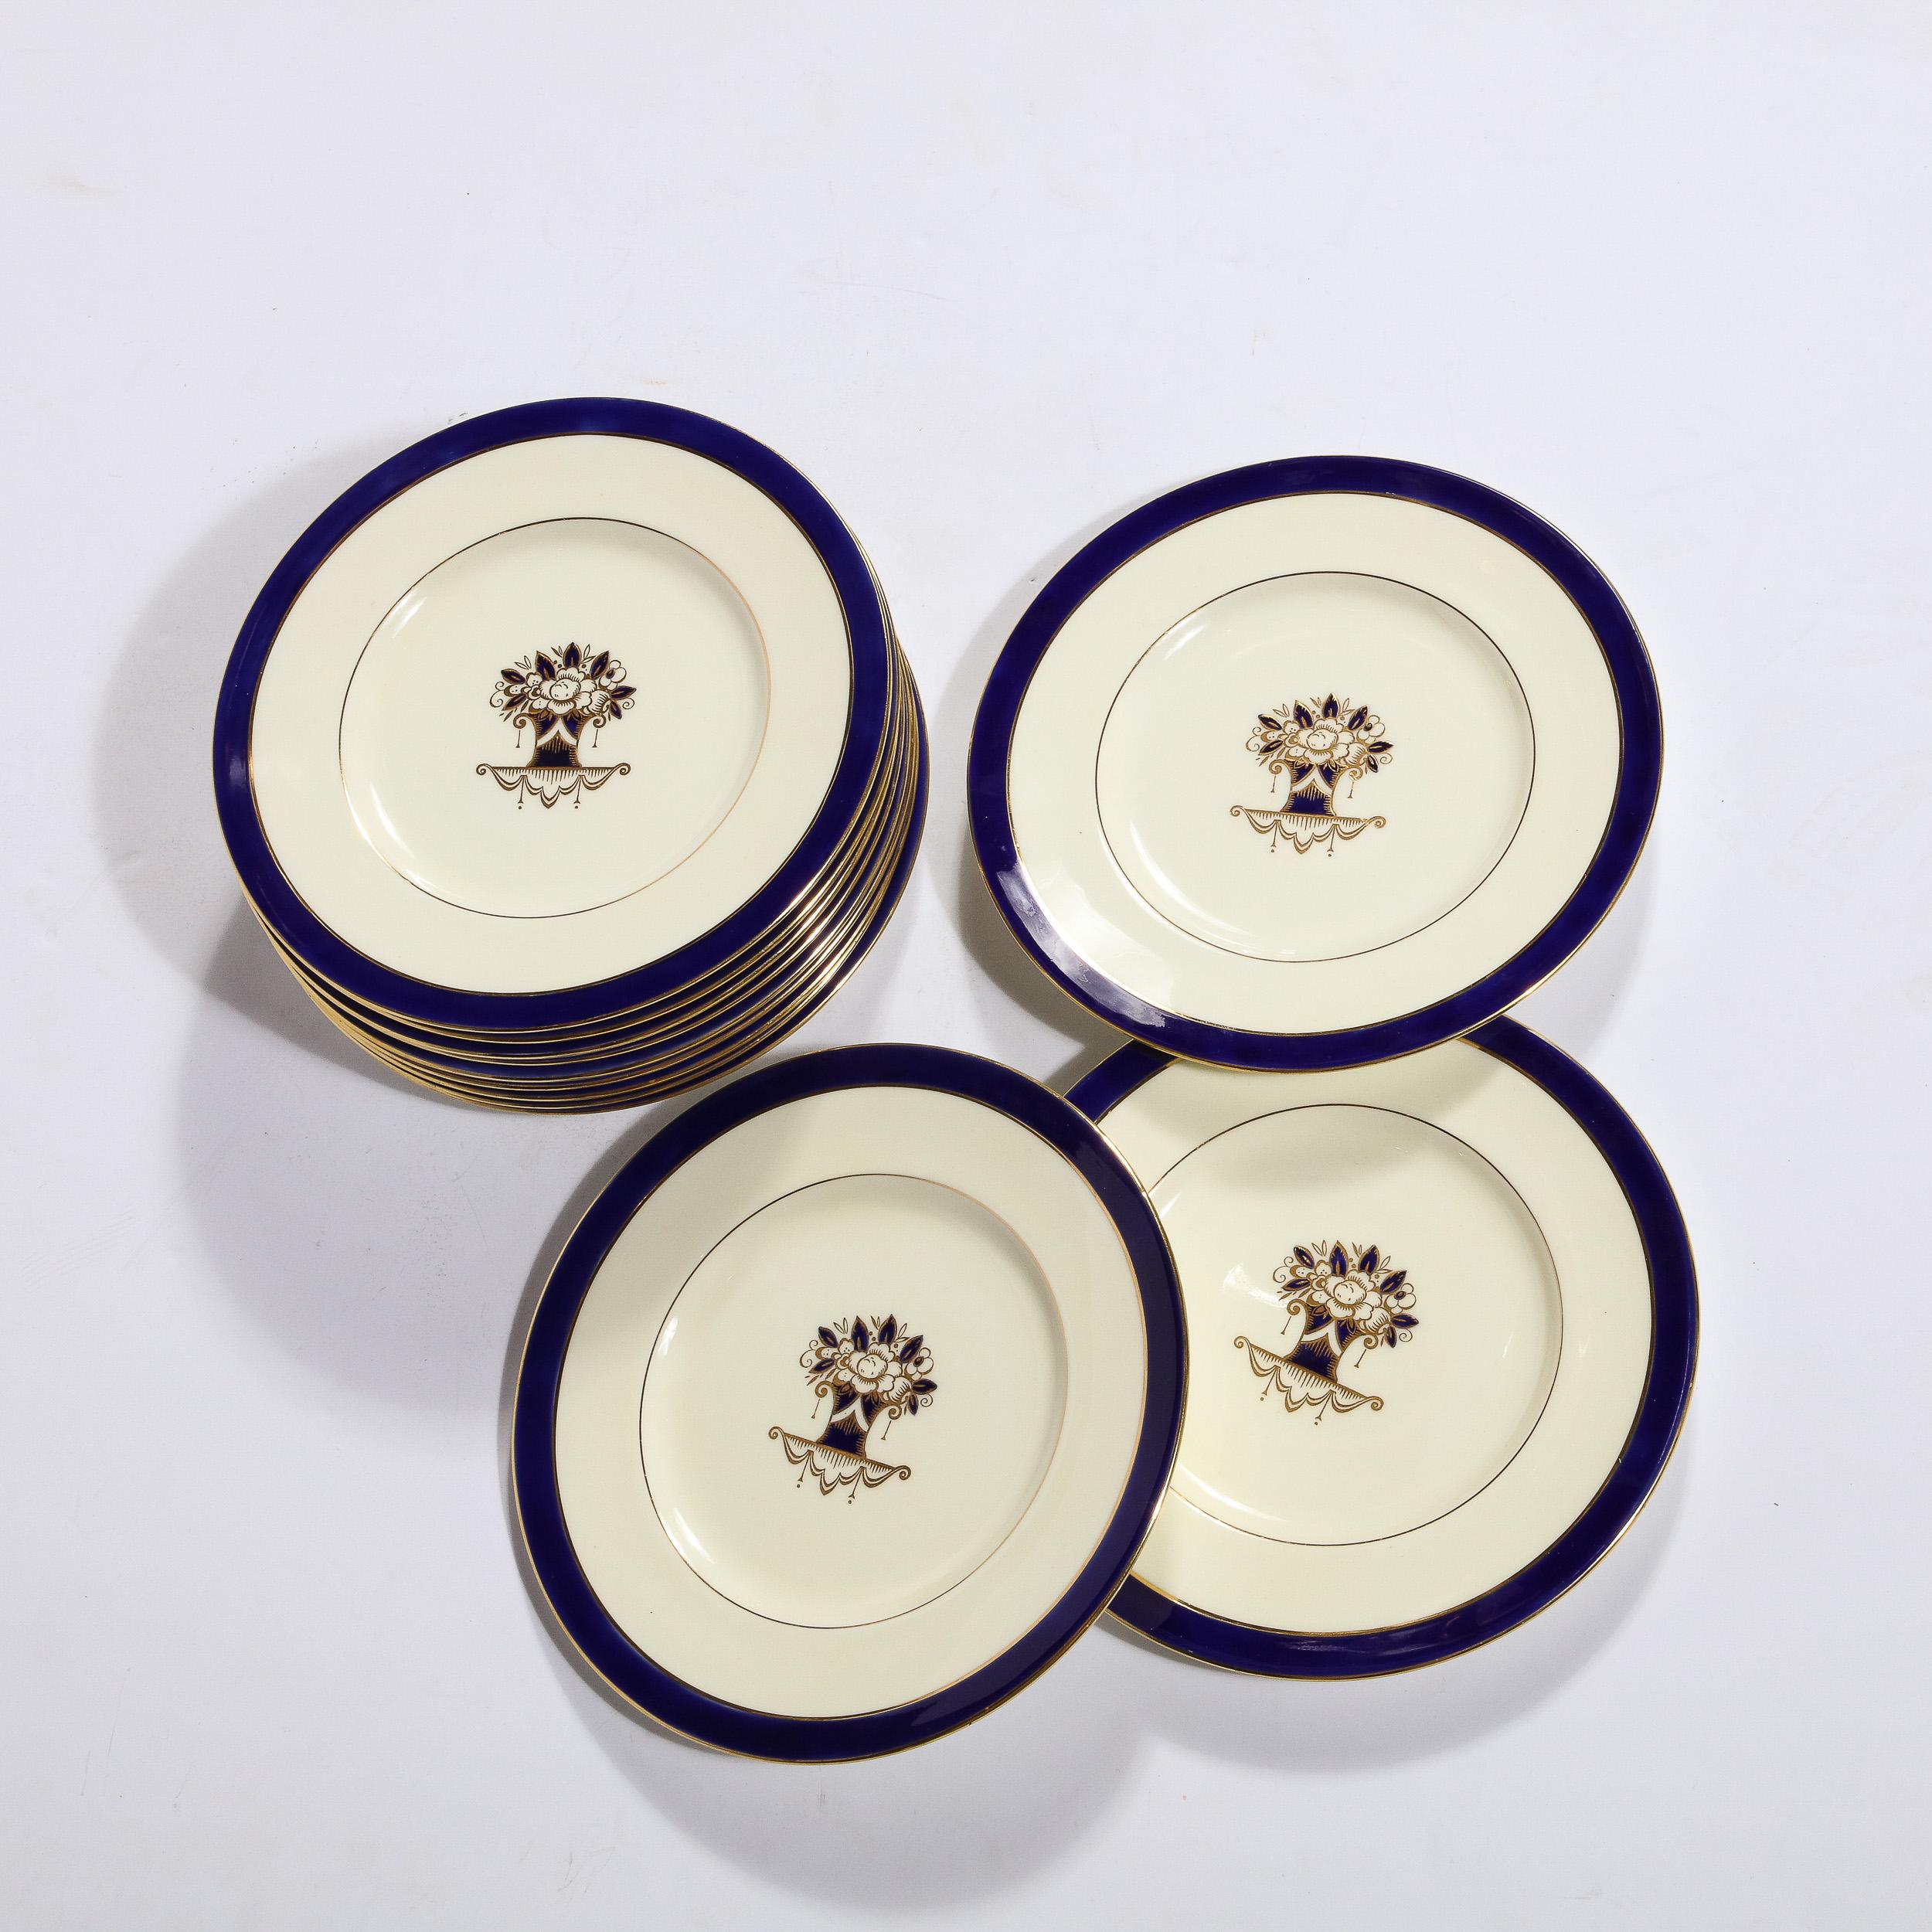 Set of 12 Art Deco Plates w/ Cobalt & 24KT Gold Detailing by Minton for Tiffany In Excellent Condition For Sale In New York, NY